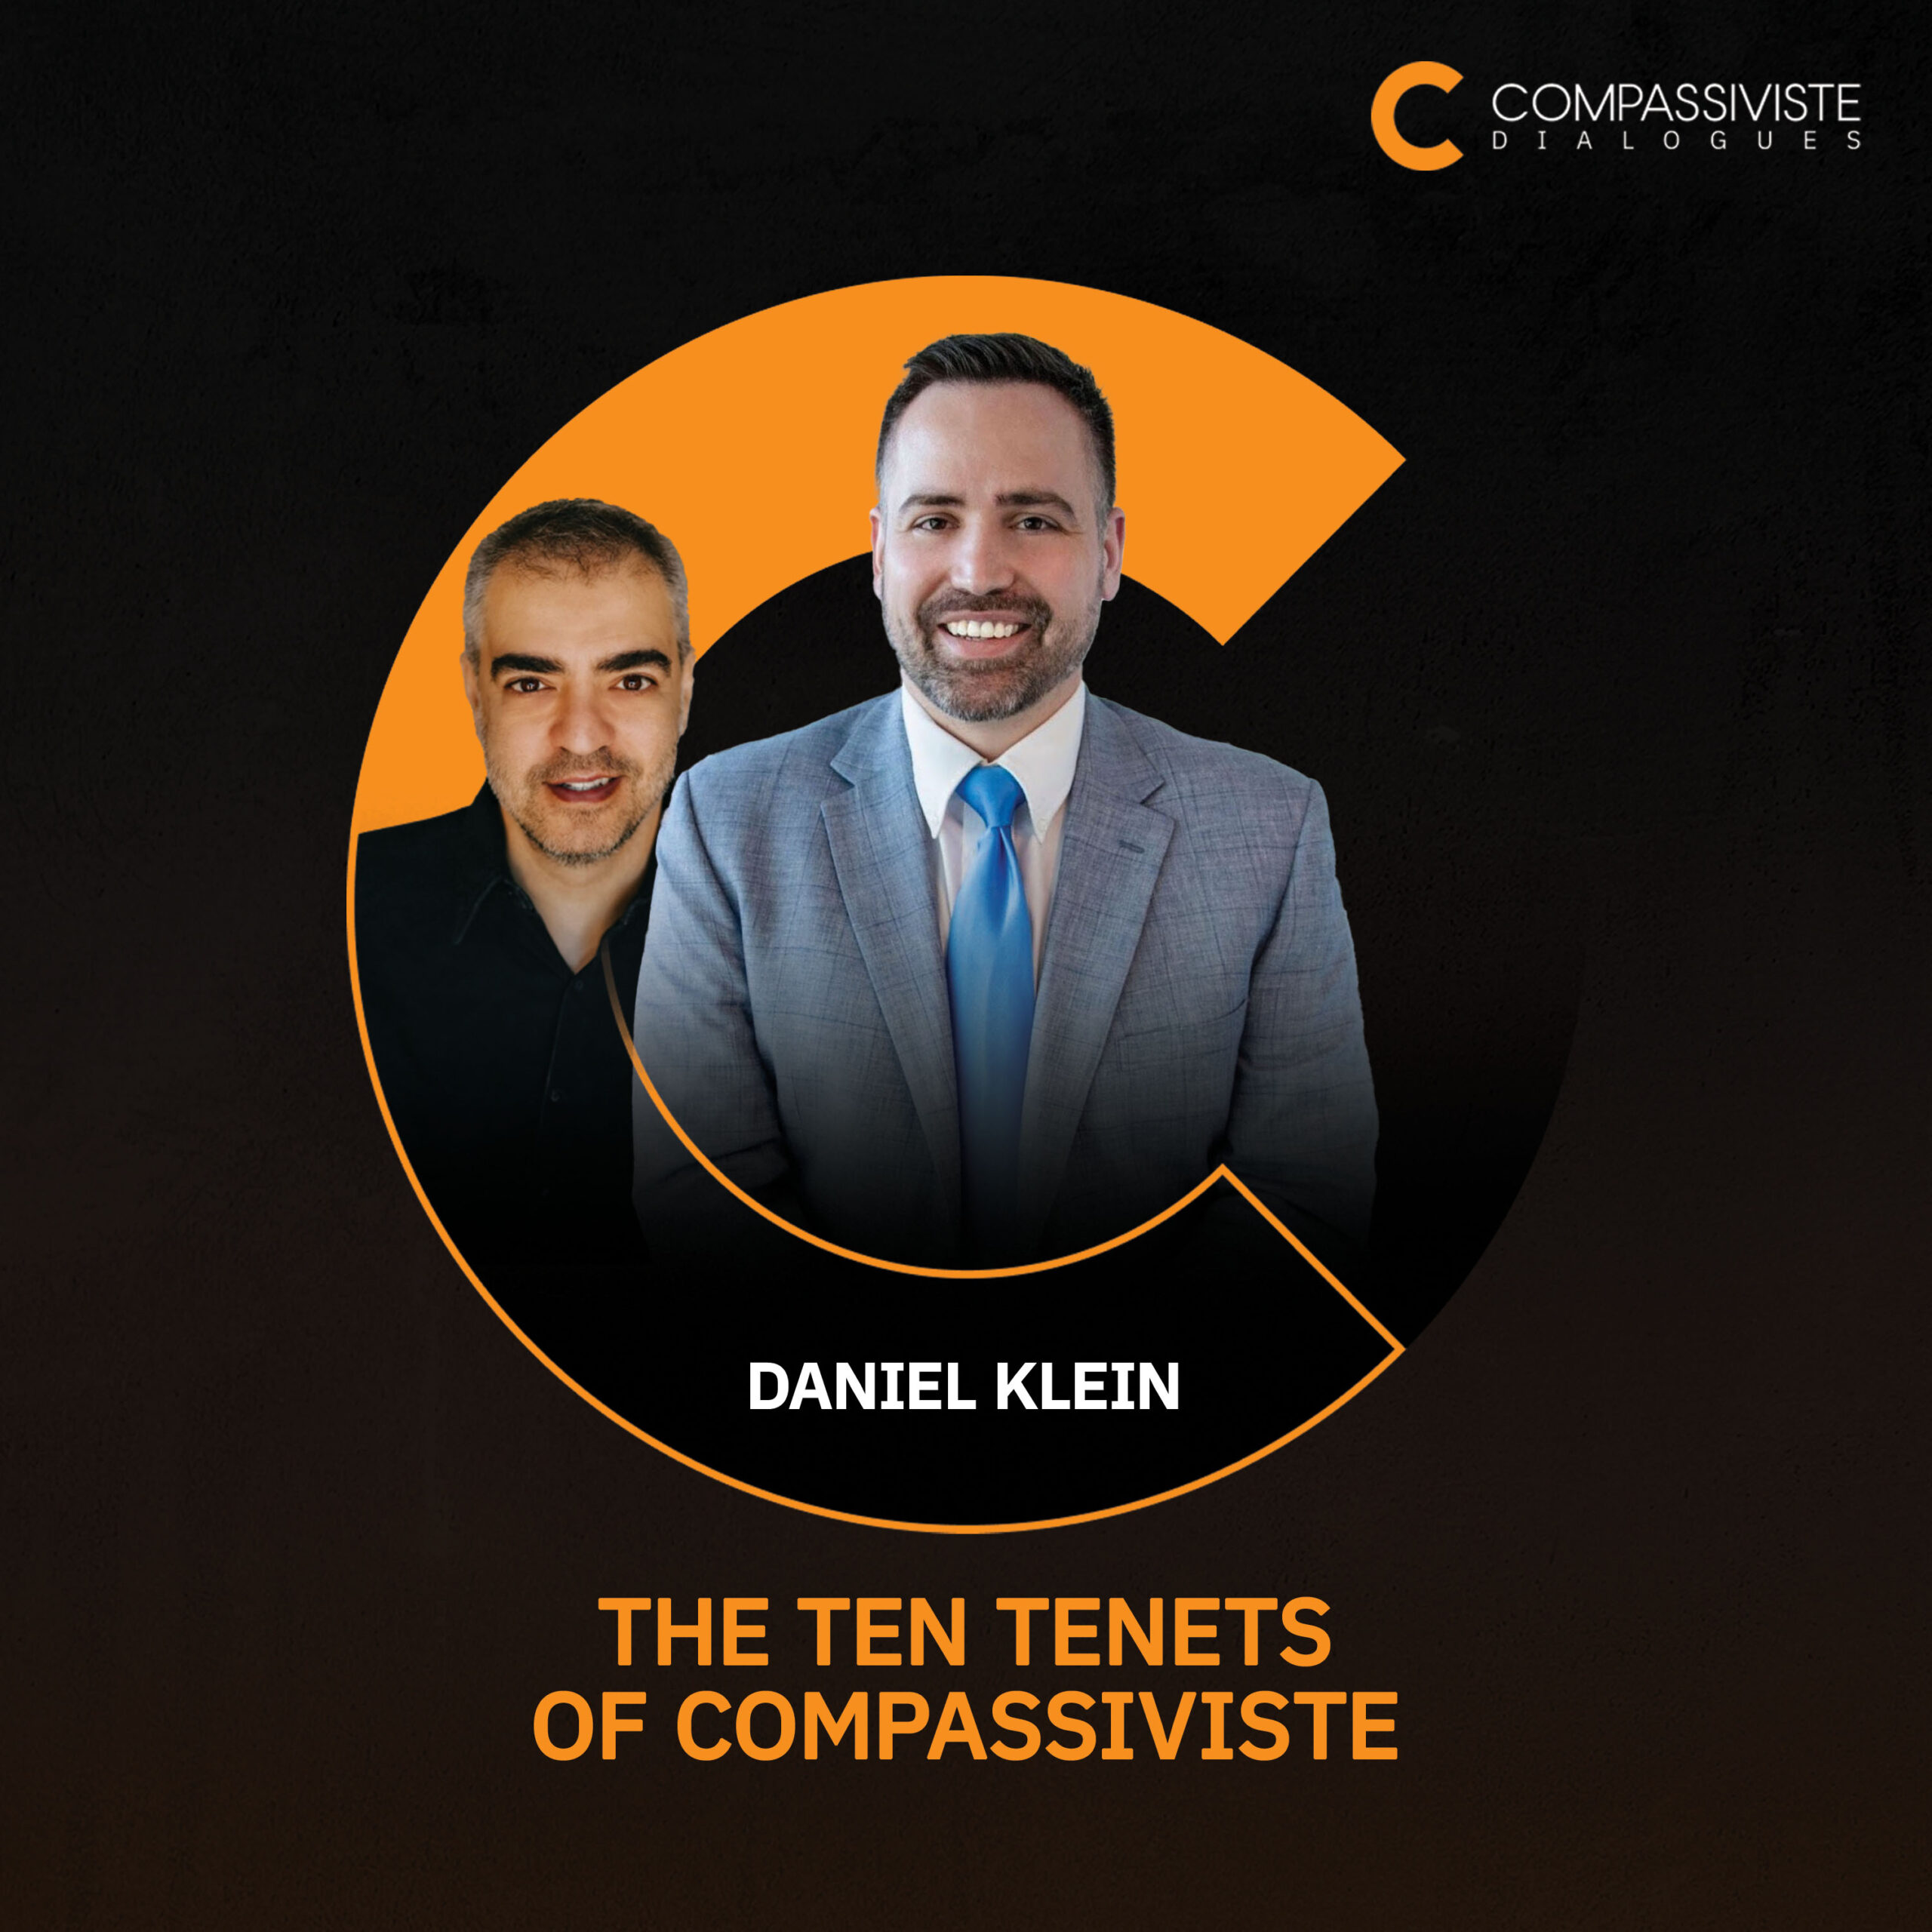 On this photo there are 2 persons Ali Horriyat and Daniel Klein incorporated into the Compassiviste Logo which is represented by letter C. There is name of the guest of this episode Daniel Klein written below them and name of the first episode of the Compassiviste Dialogues podcast which is "The Ten Tenets of Compassiviste"